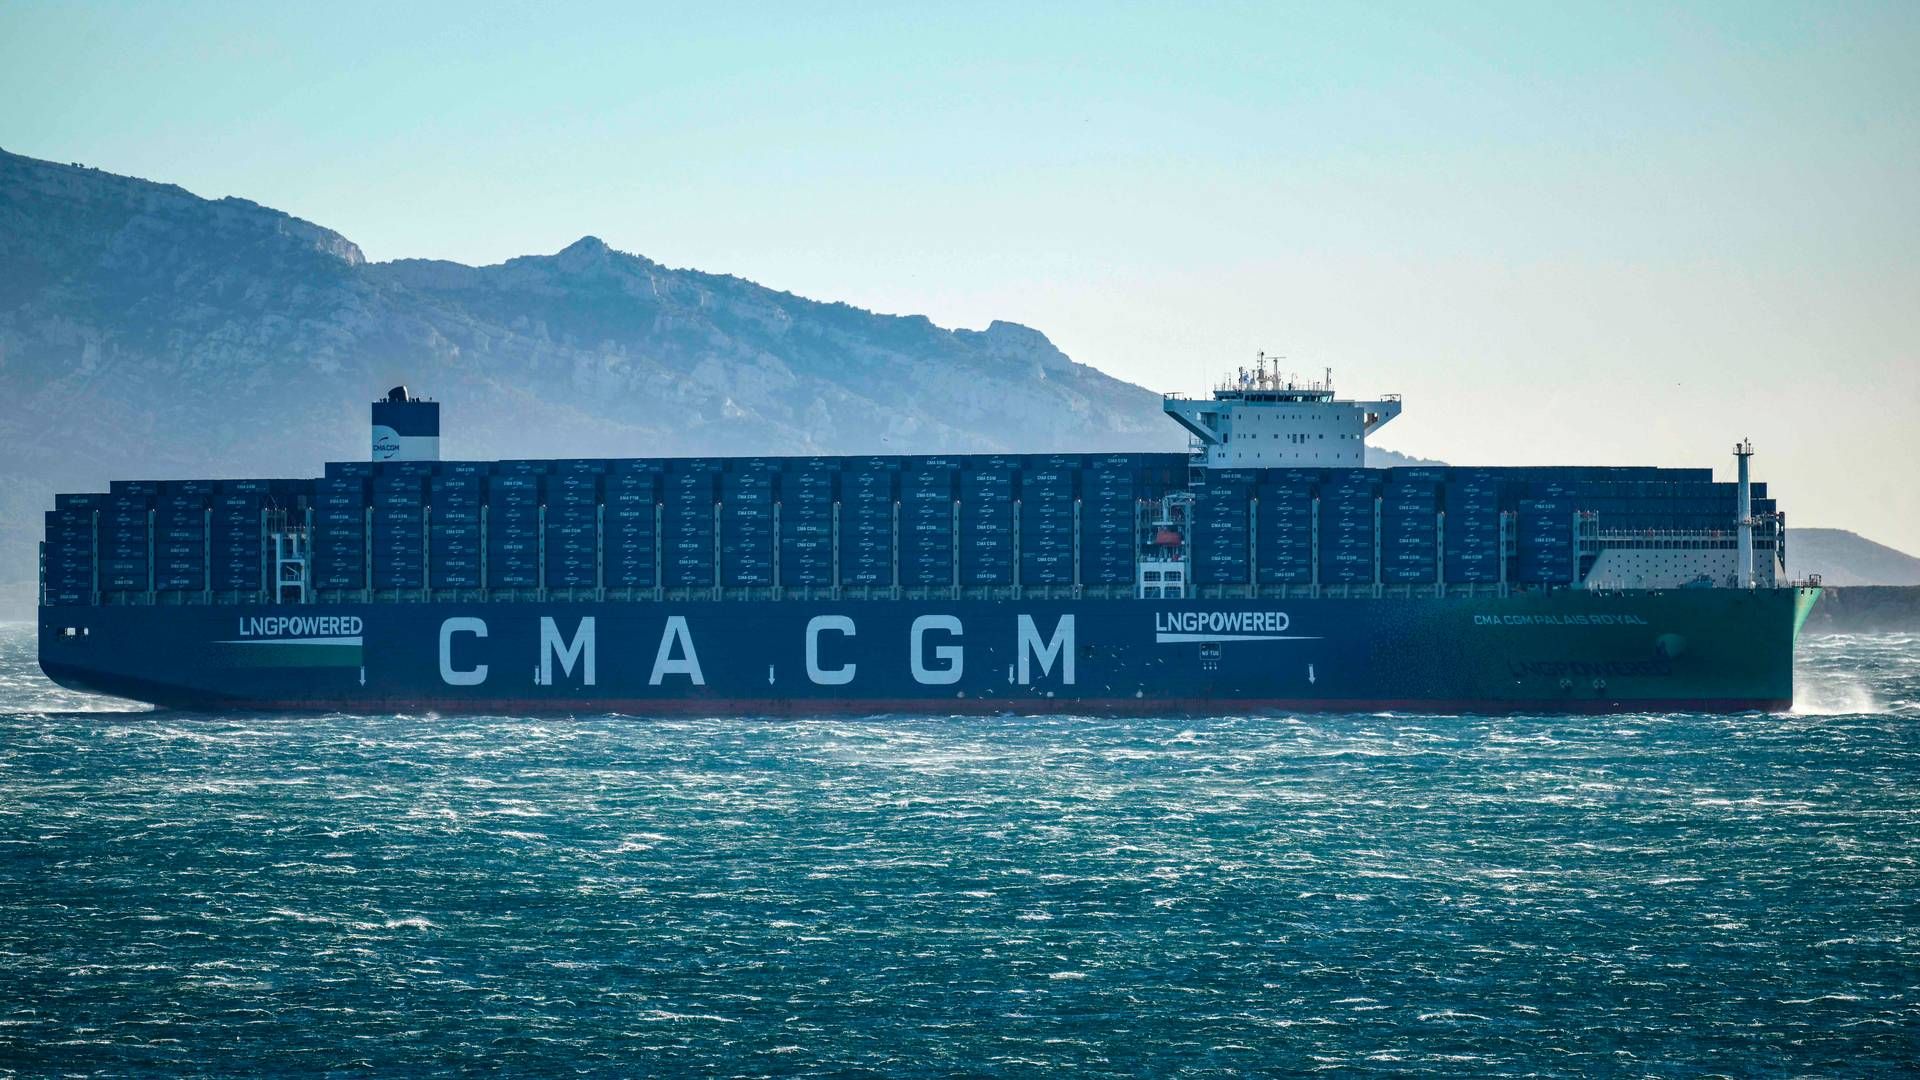 The CMA CGM Palais Royal, the world's largest container ship powered by natural gas, sails in the Bay of Marseille in the south of France on Dec. 14, 2023. CMA CGM announced on Dec.16, 2023, that it, like Maersk and Hapag-Lloyd, will suspend sailings in the Red Sea following attacks on ships by Yemen's Houthi rebels. | Photo: Christophe Simon